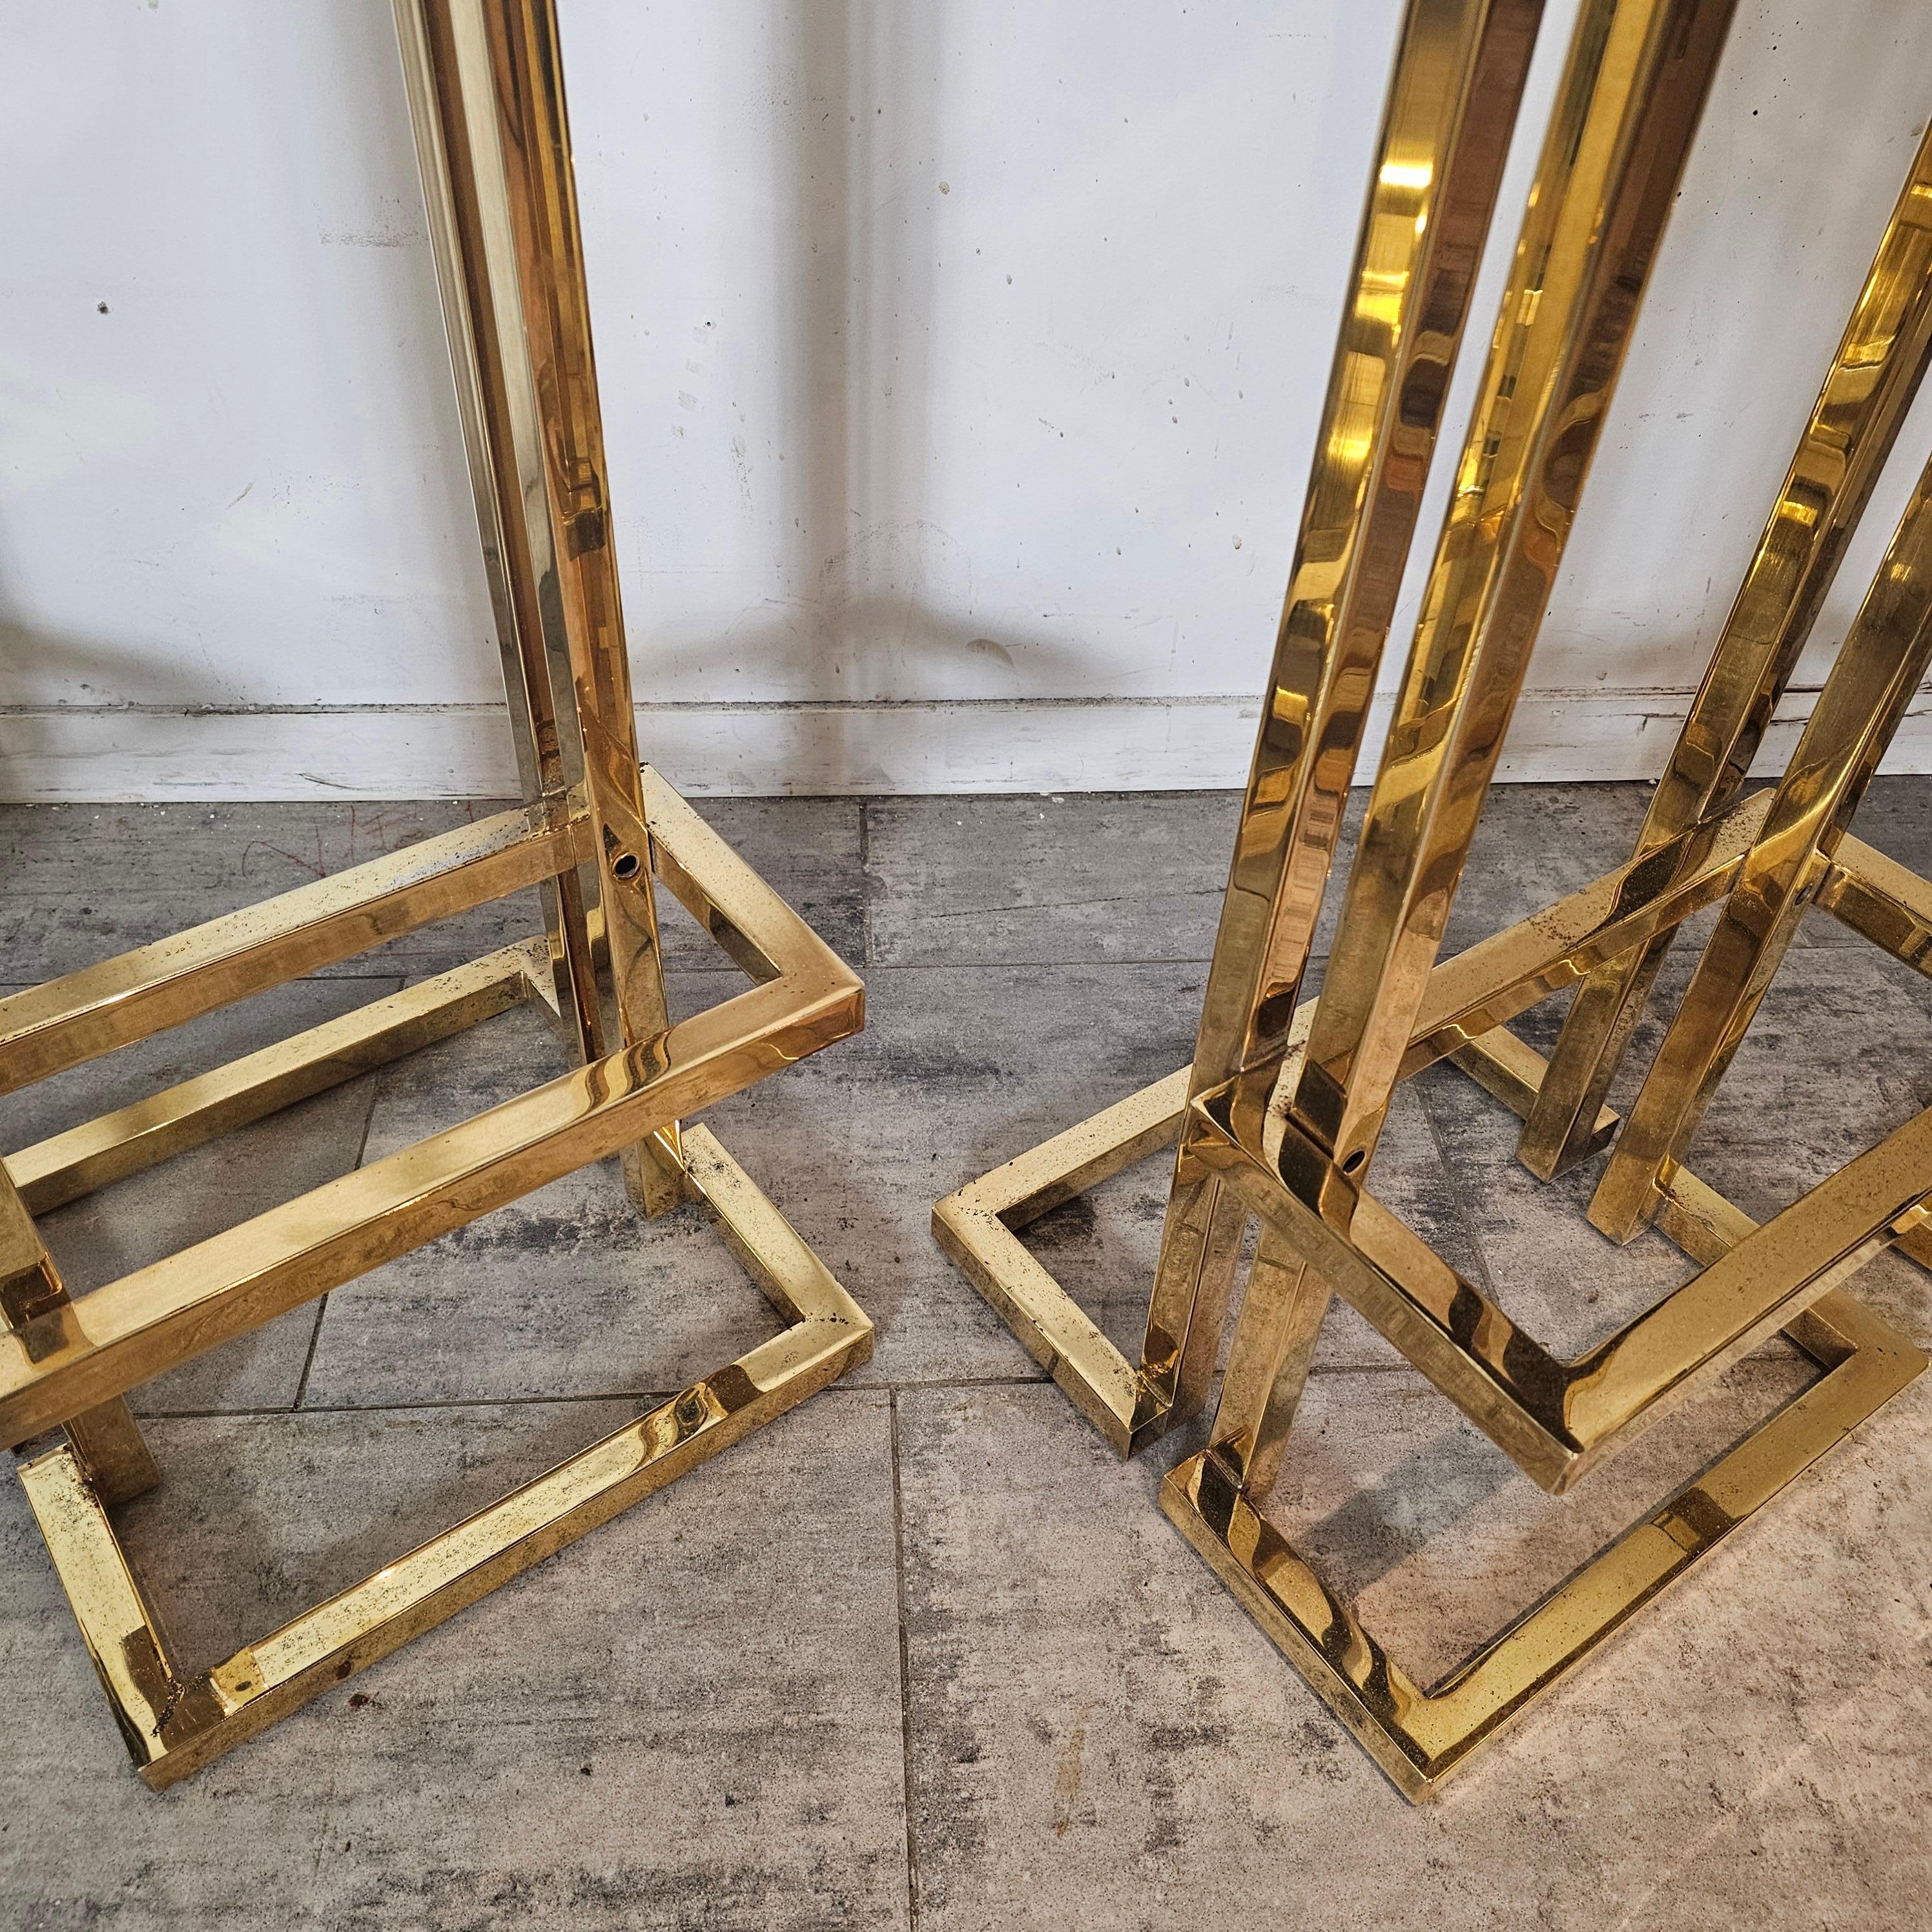 Set of 4 Bar Stools in the Style of 